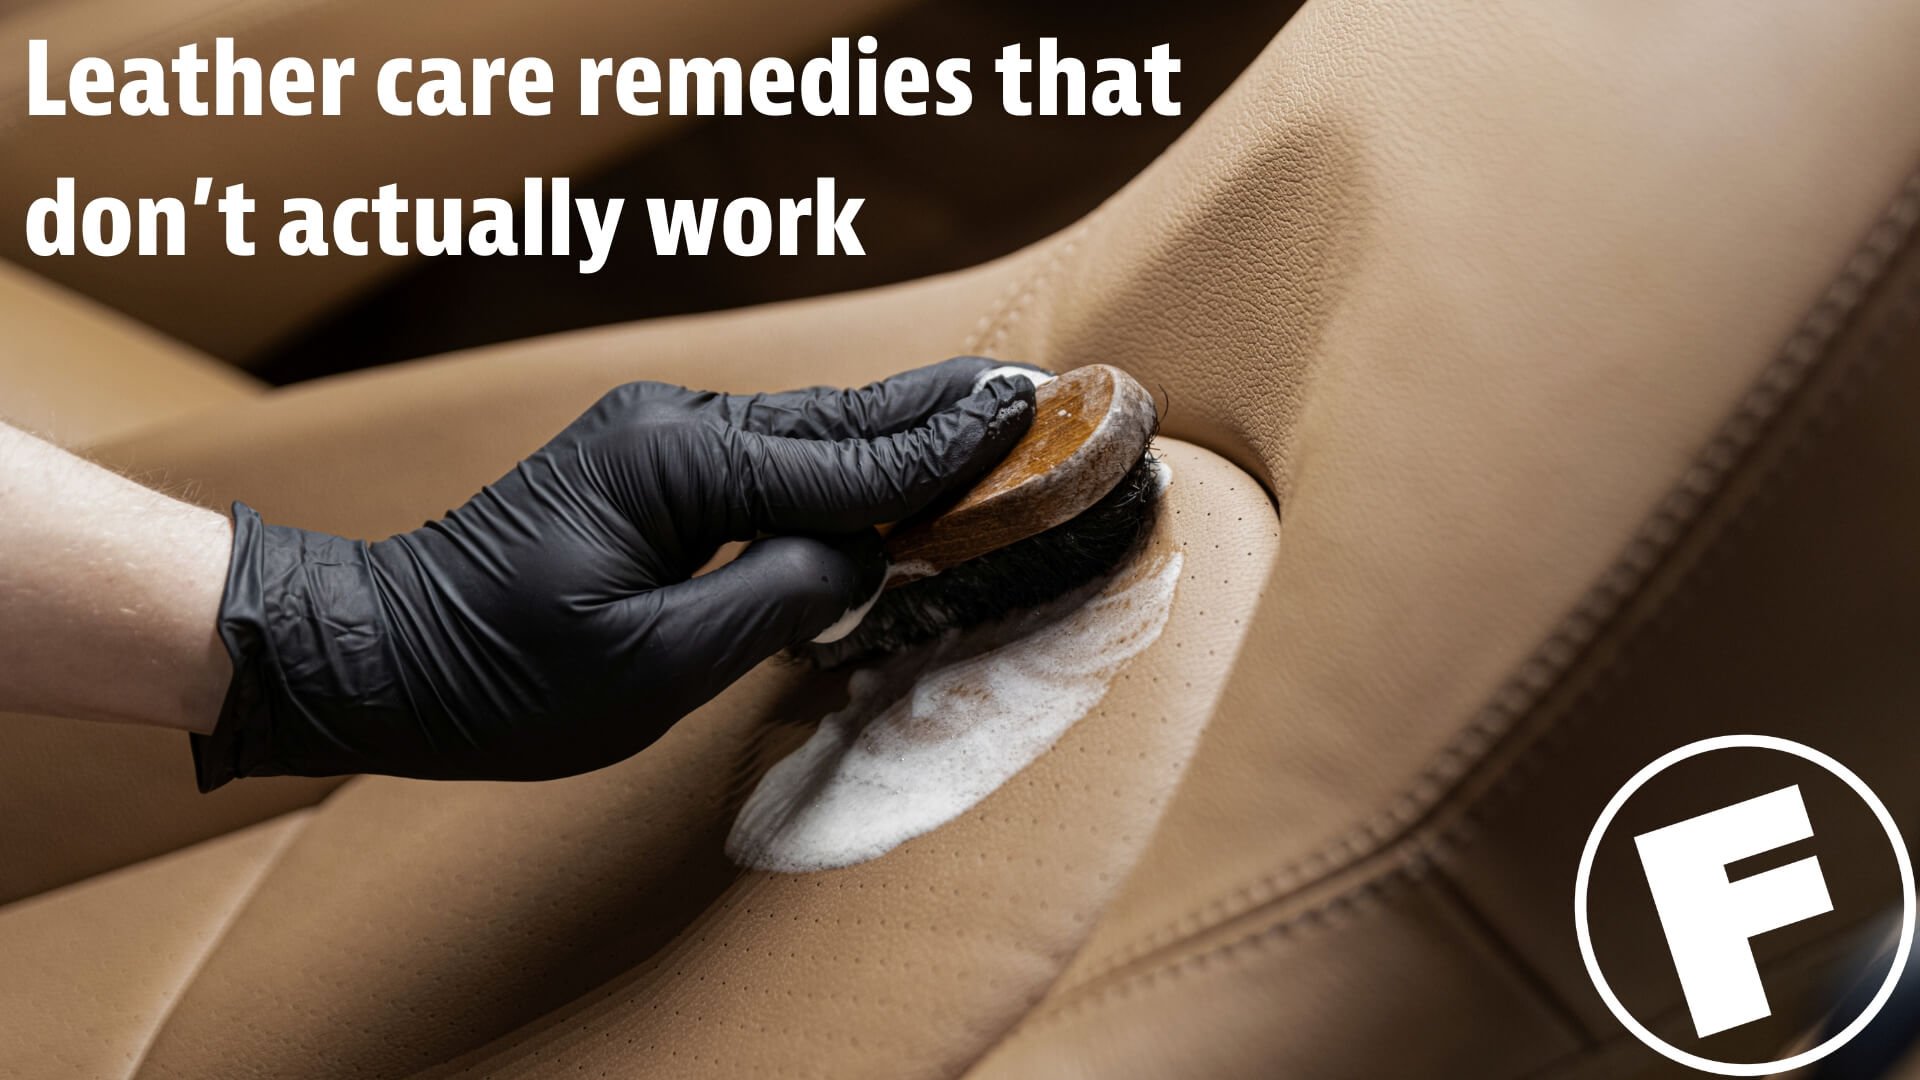 Leather Care Tips: How to Clean Leather Goods?